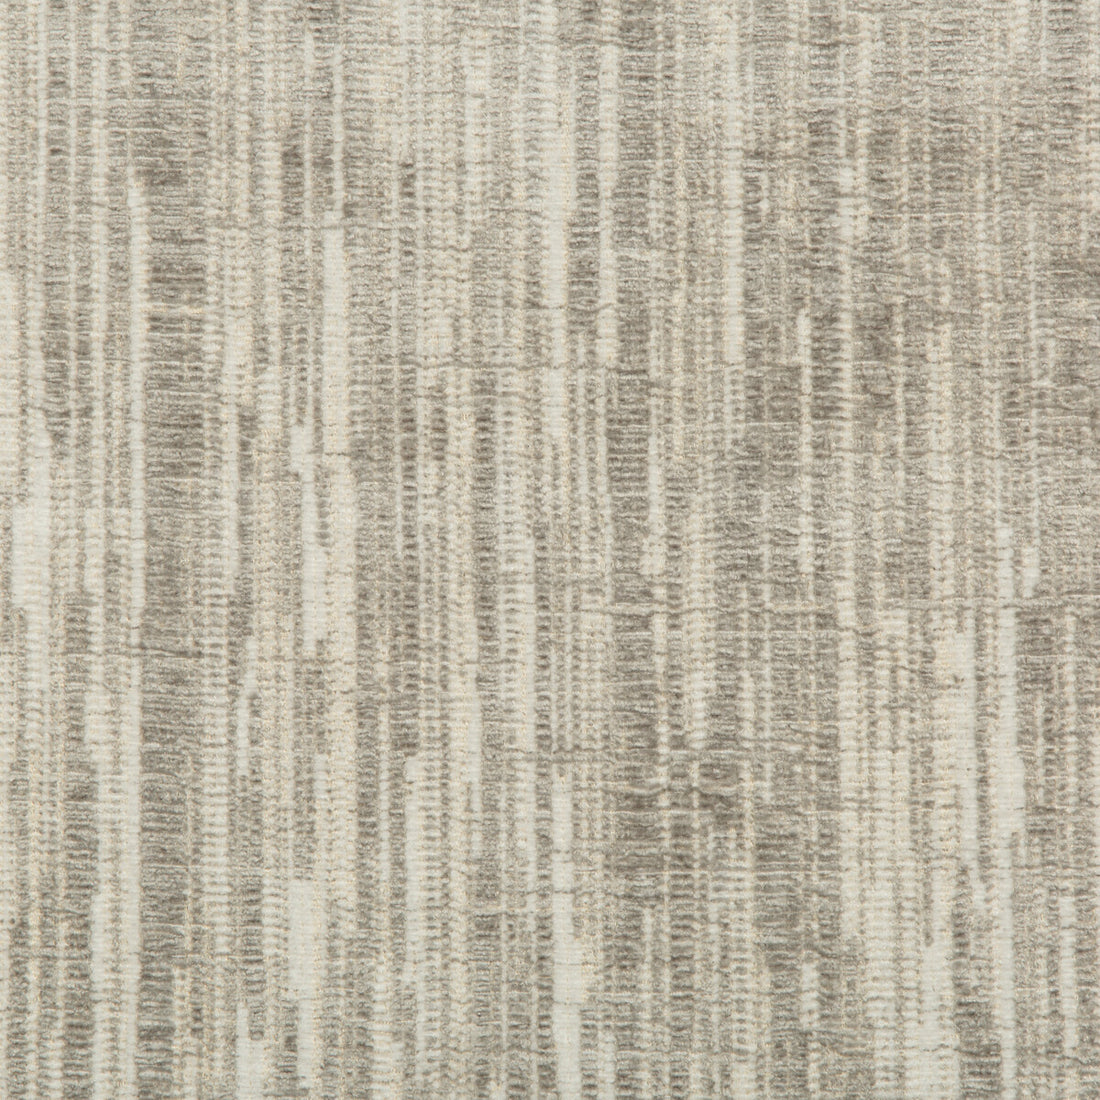 Now And Zen fabric in platinum color - pattern 35445.11.0 - by Kravet Couture in the Izu Collection collection